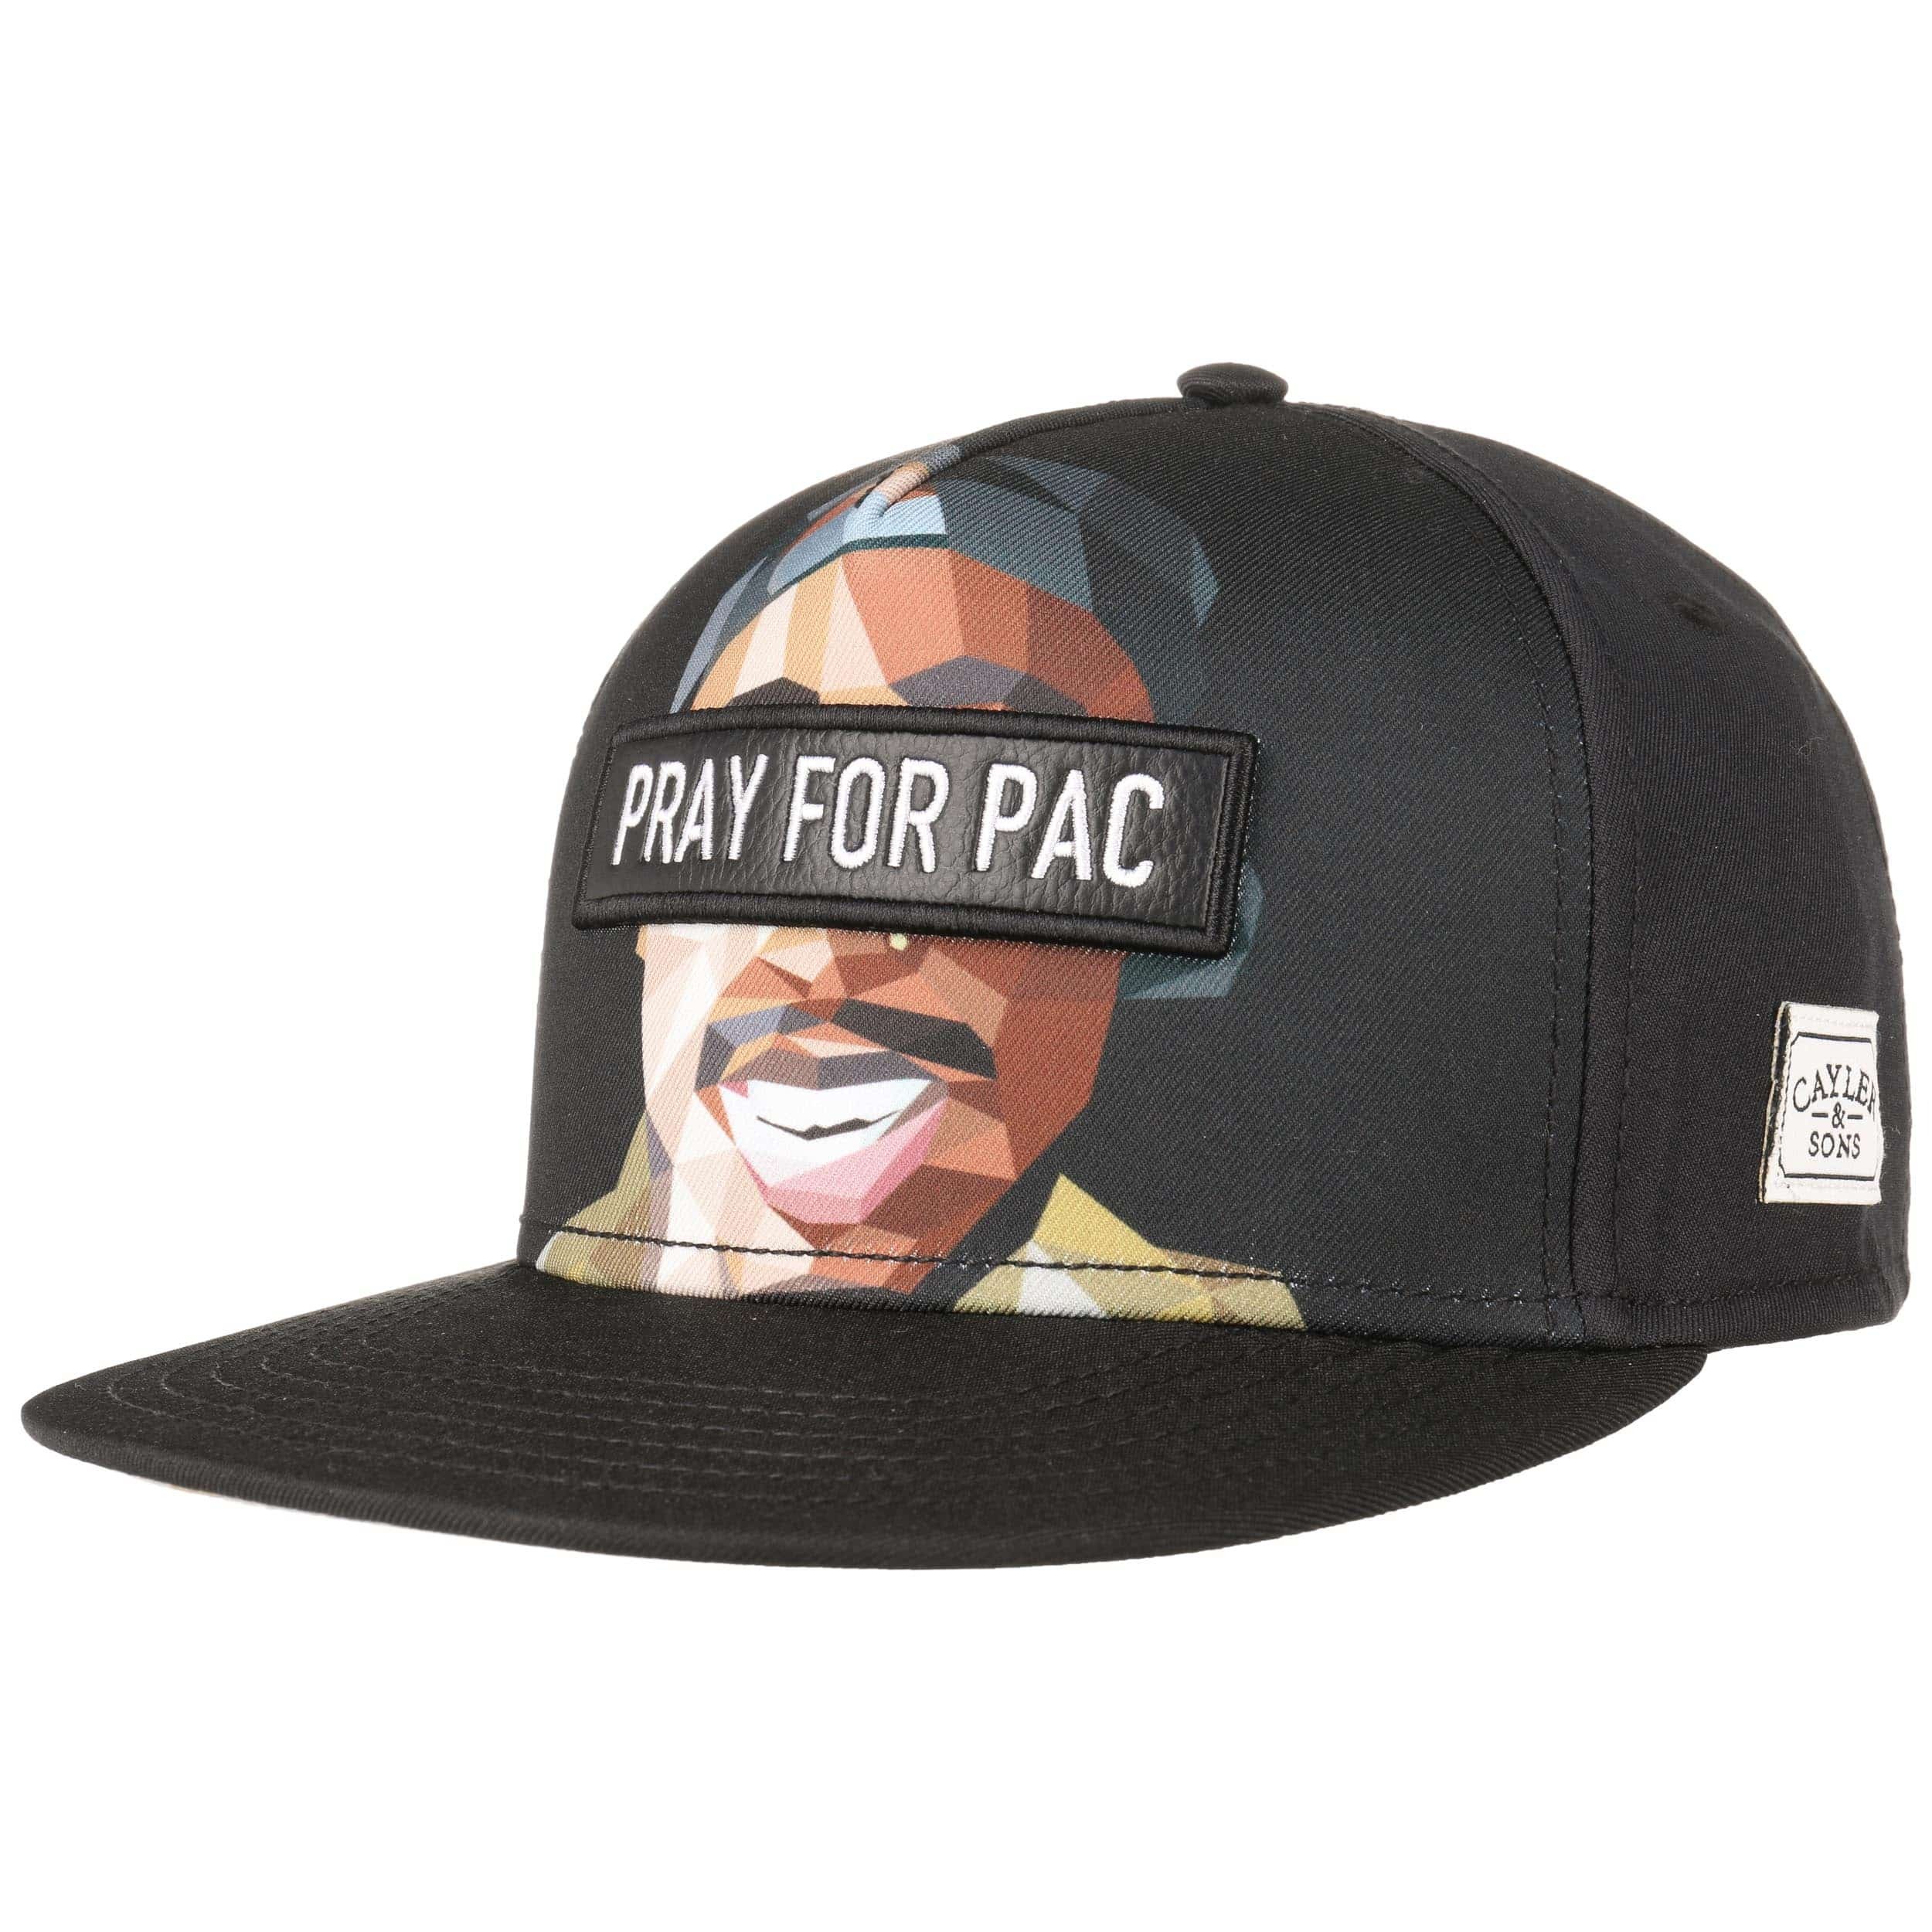 Pacasso Snapback Cap by Cayler & Sons - 37,95 €